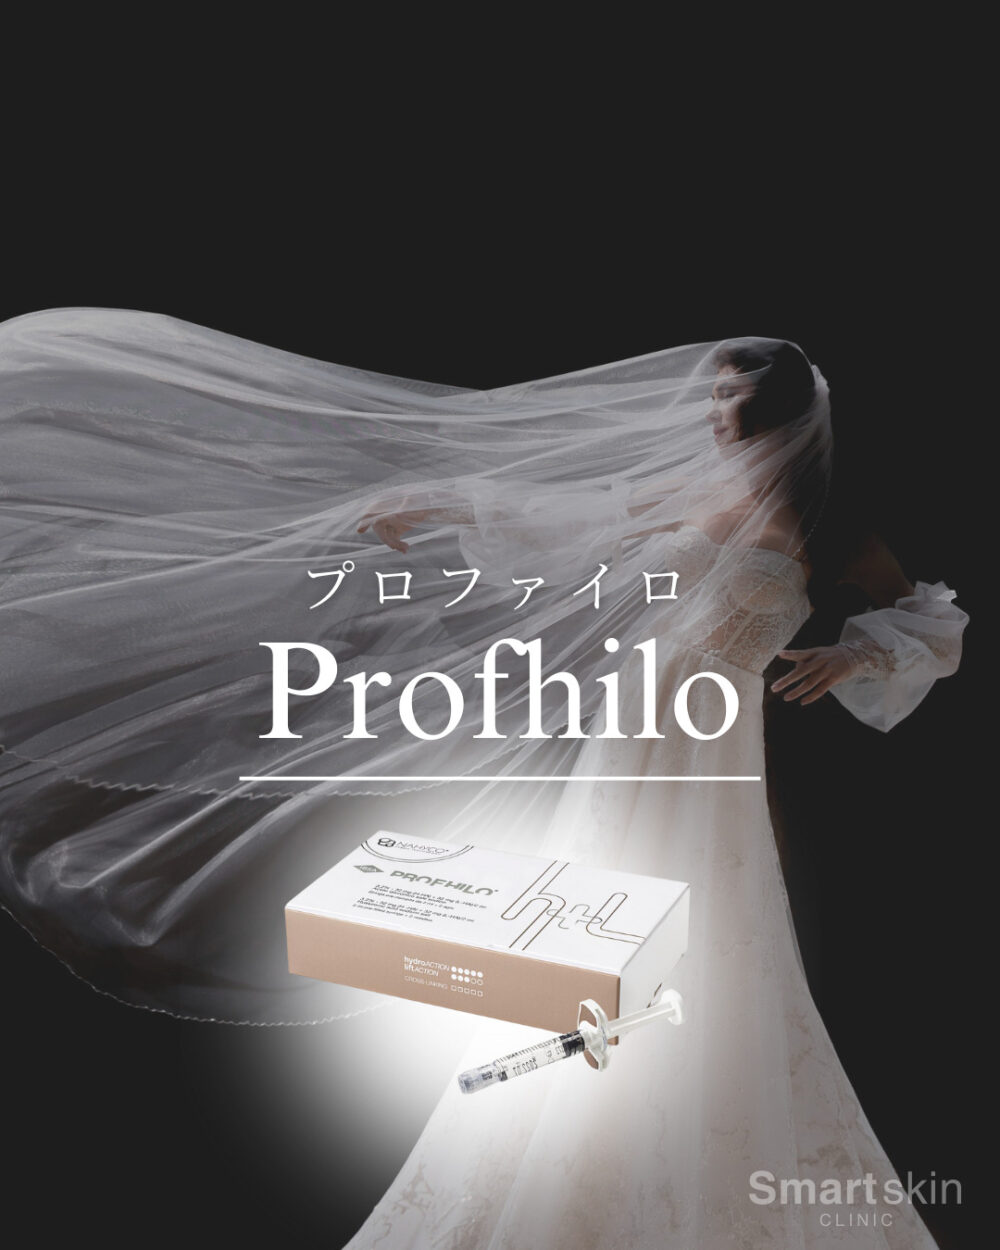 PROFHILO injection